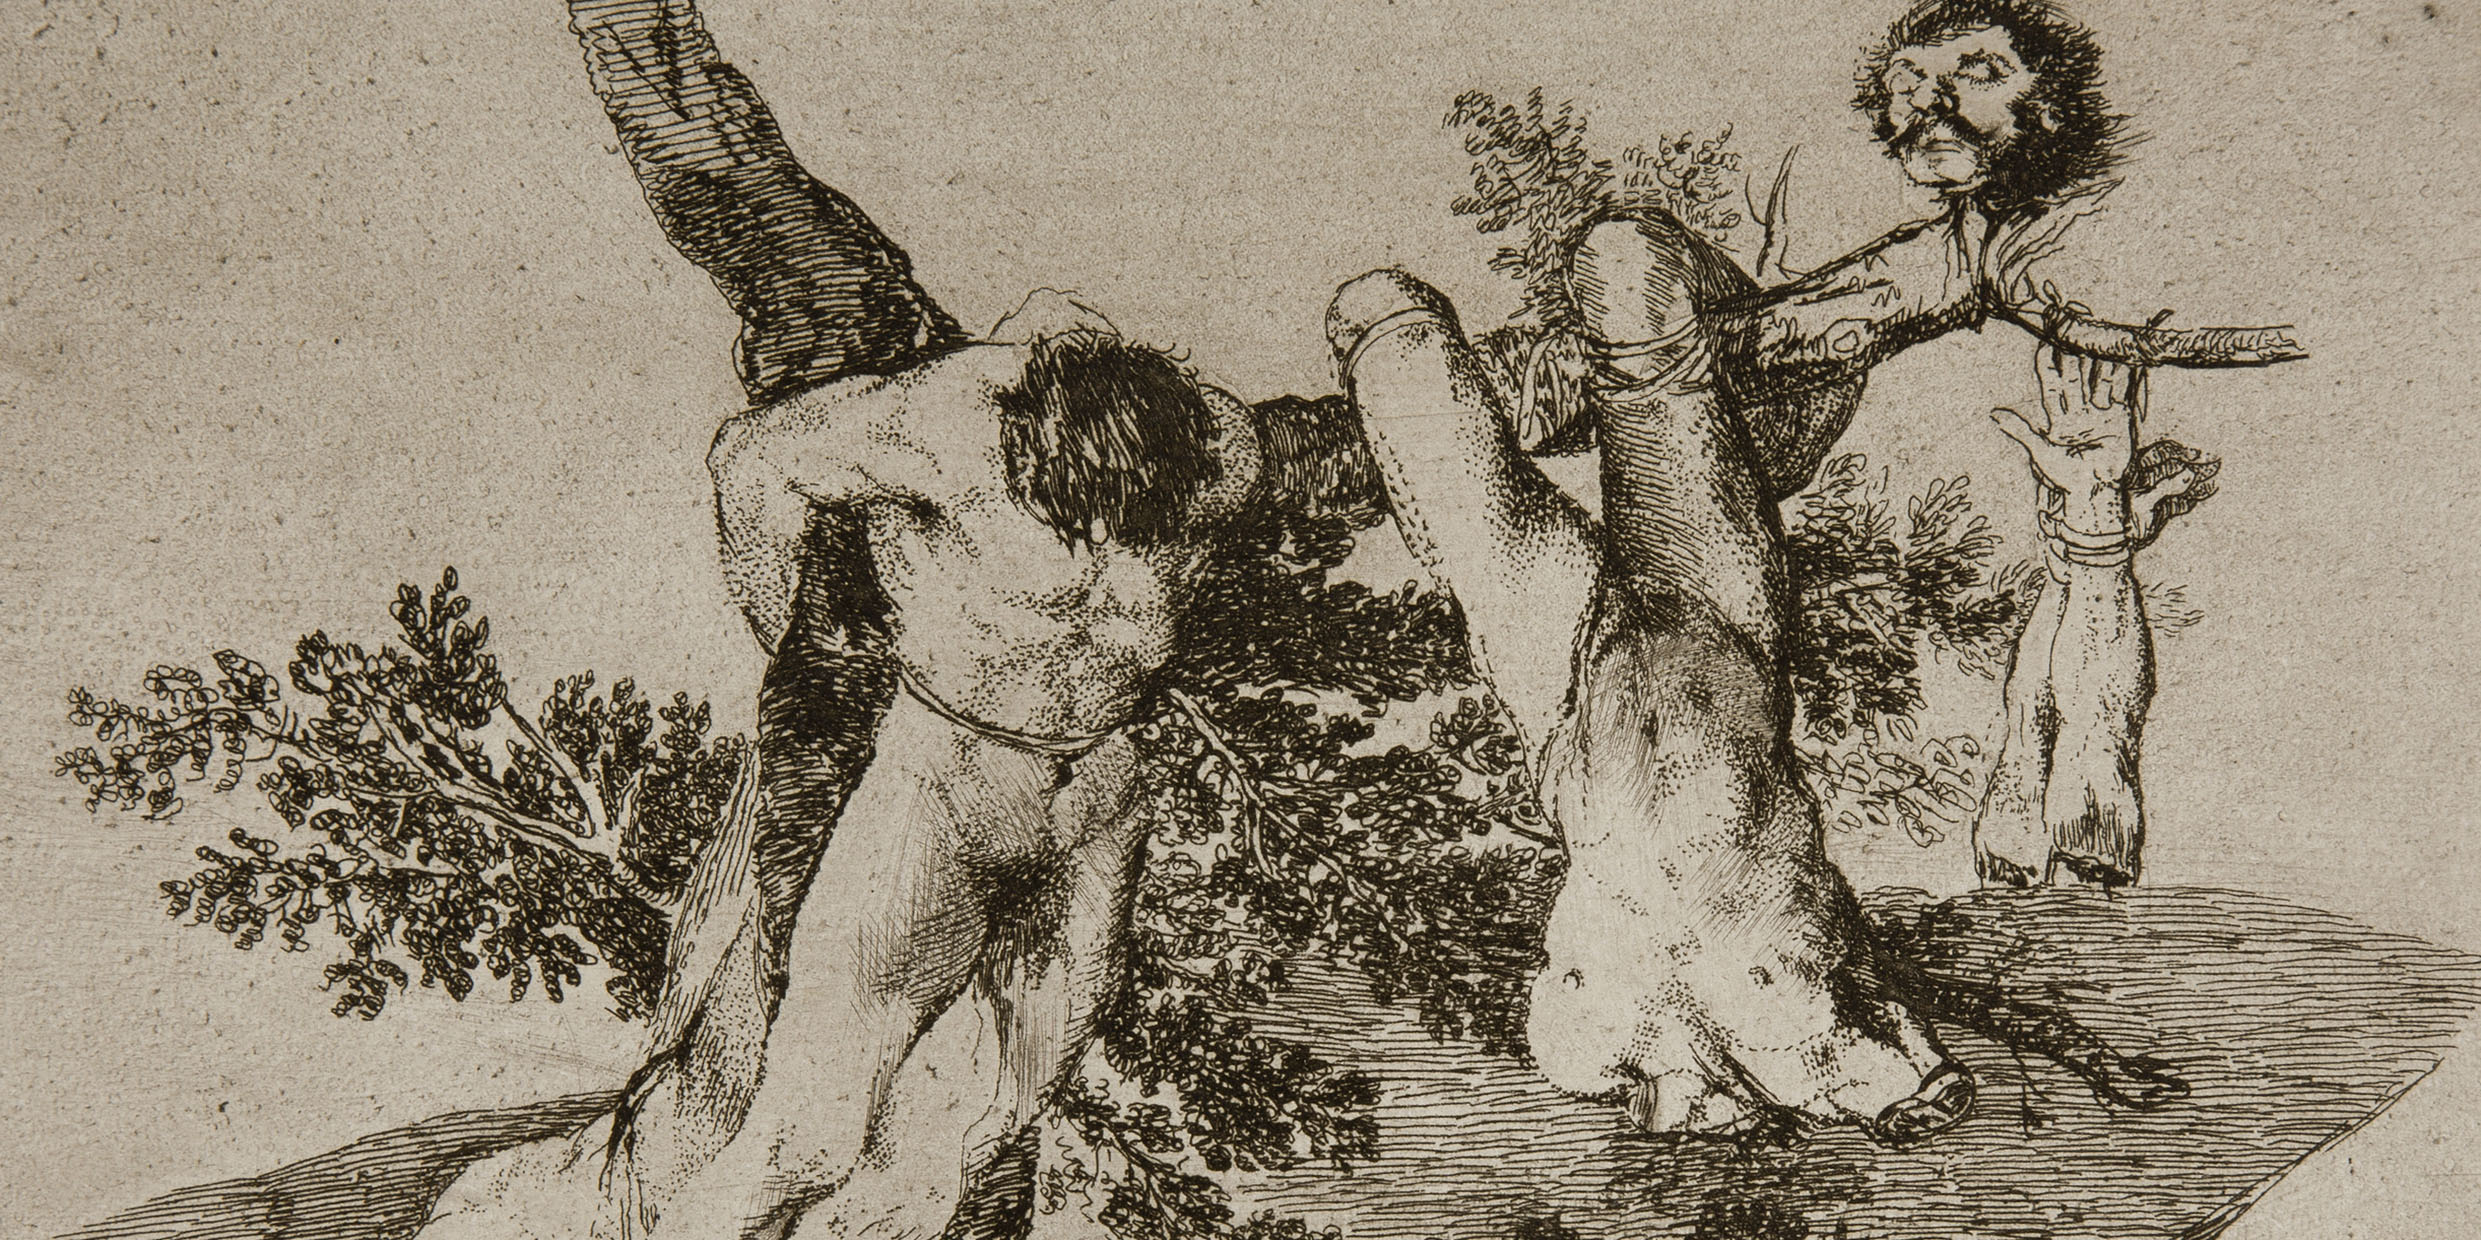 Etching of severed bodies hanging from tree